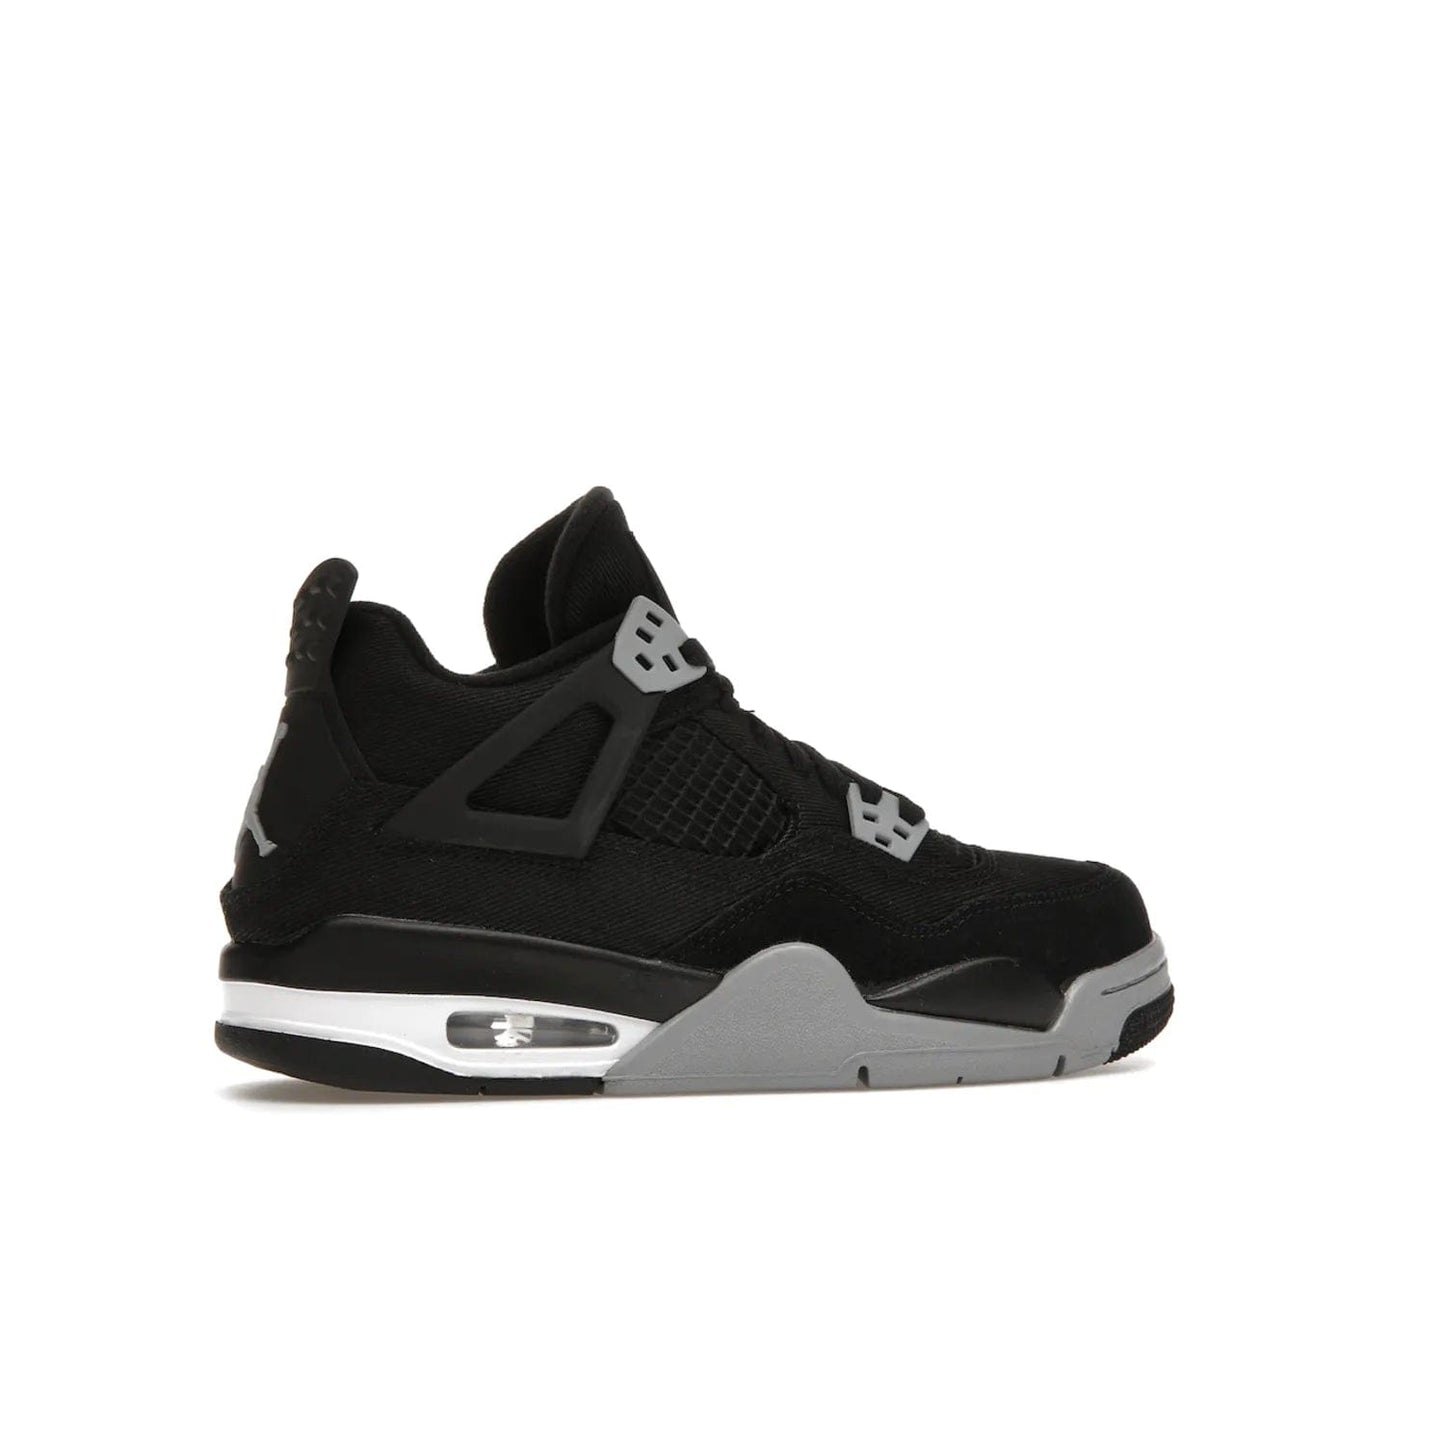 Jordan 4 Retro Black Canvas (GS) - Image 35 - Only at www.BallersClubKickz.com - Premium Air Jordan 4 Retro Black Canvas in grade-schooler's catalog. Featuring black suede canvas upper, grey molding, accents in red, white midsole, woven Jumpman tag, & visible AIR cushioning. Releasing Oct. 1, 2022.